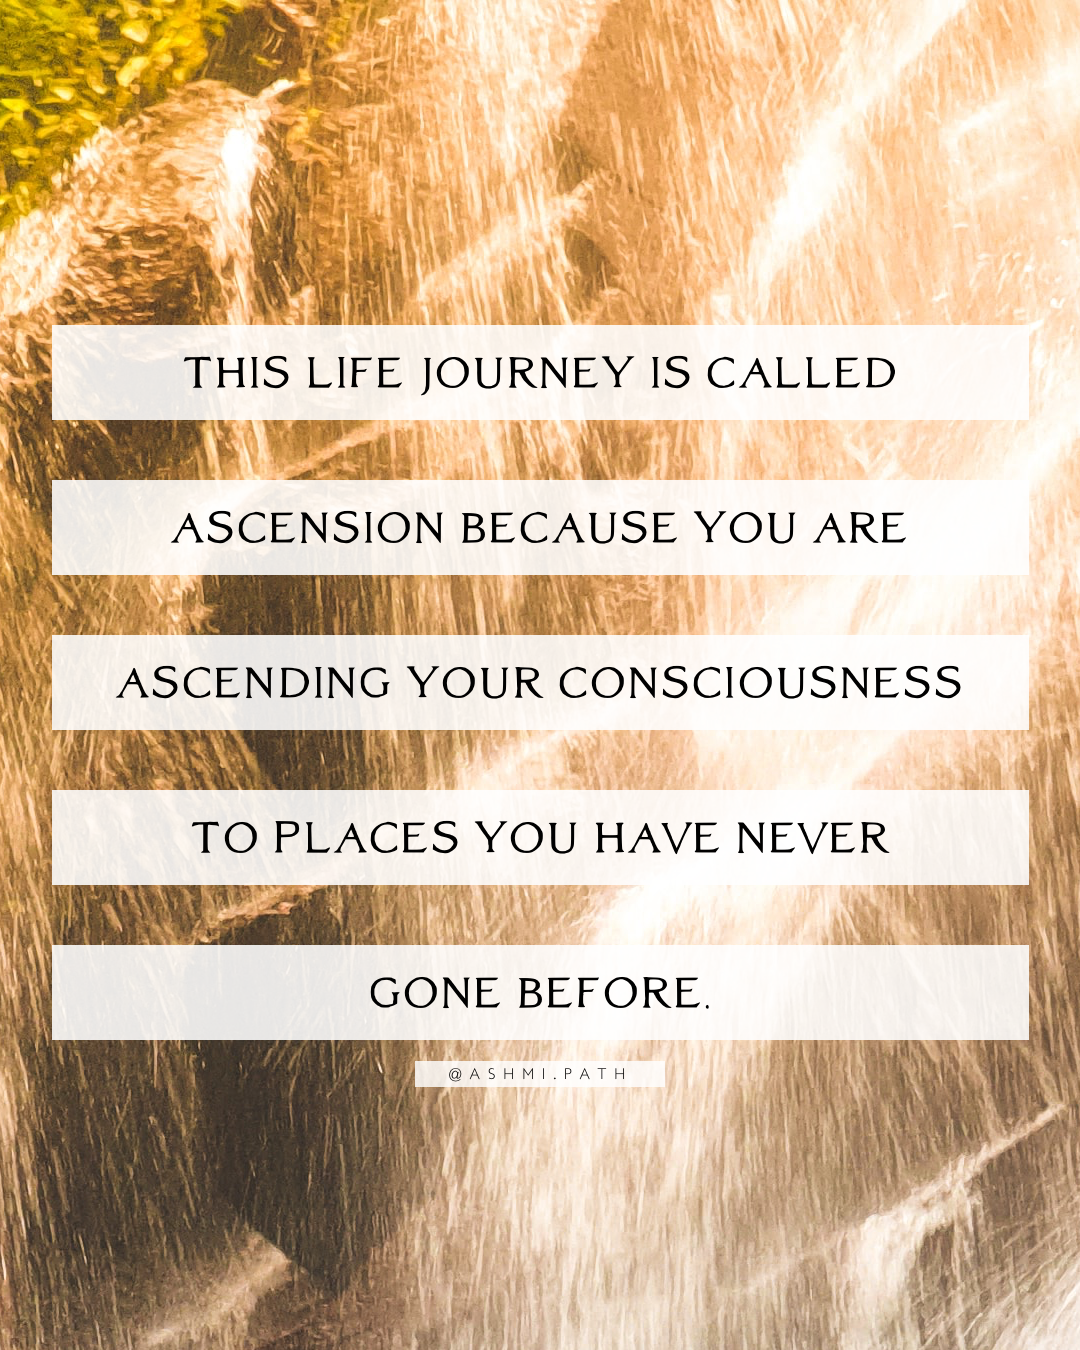 New Doors Opening: The Ascension Journey